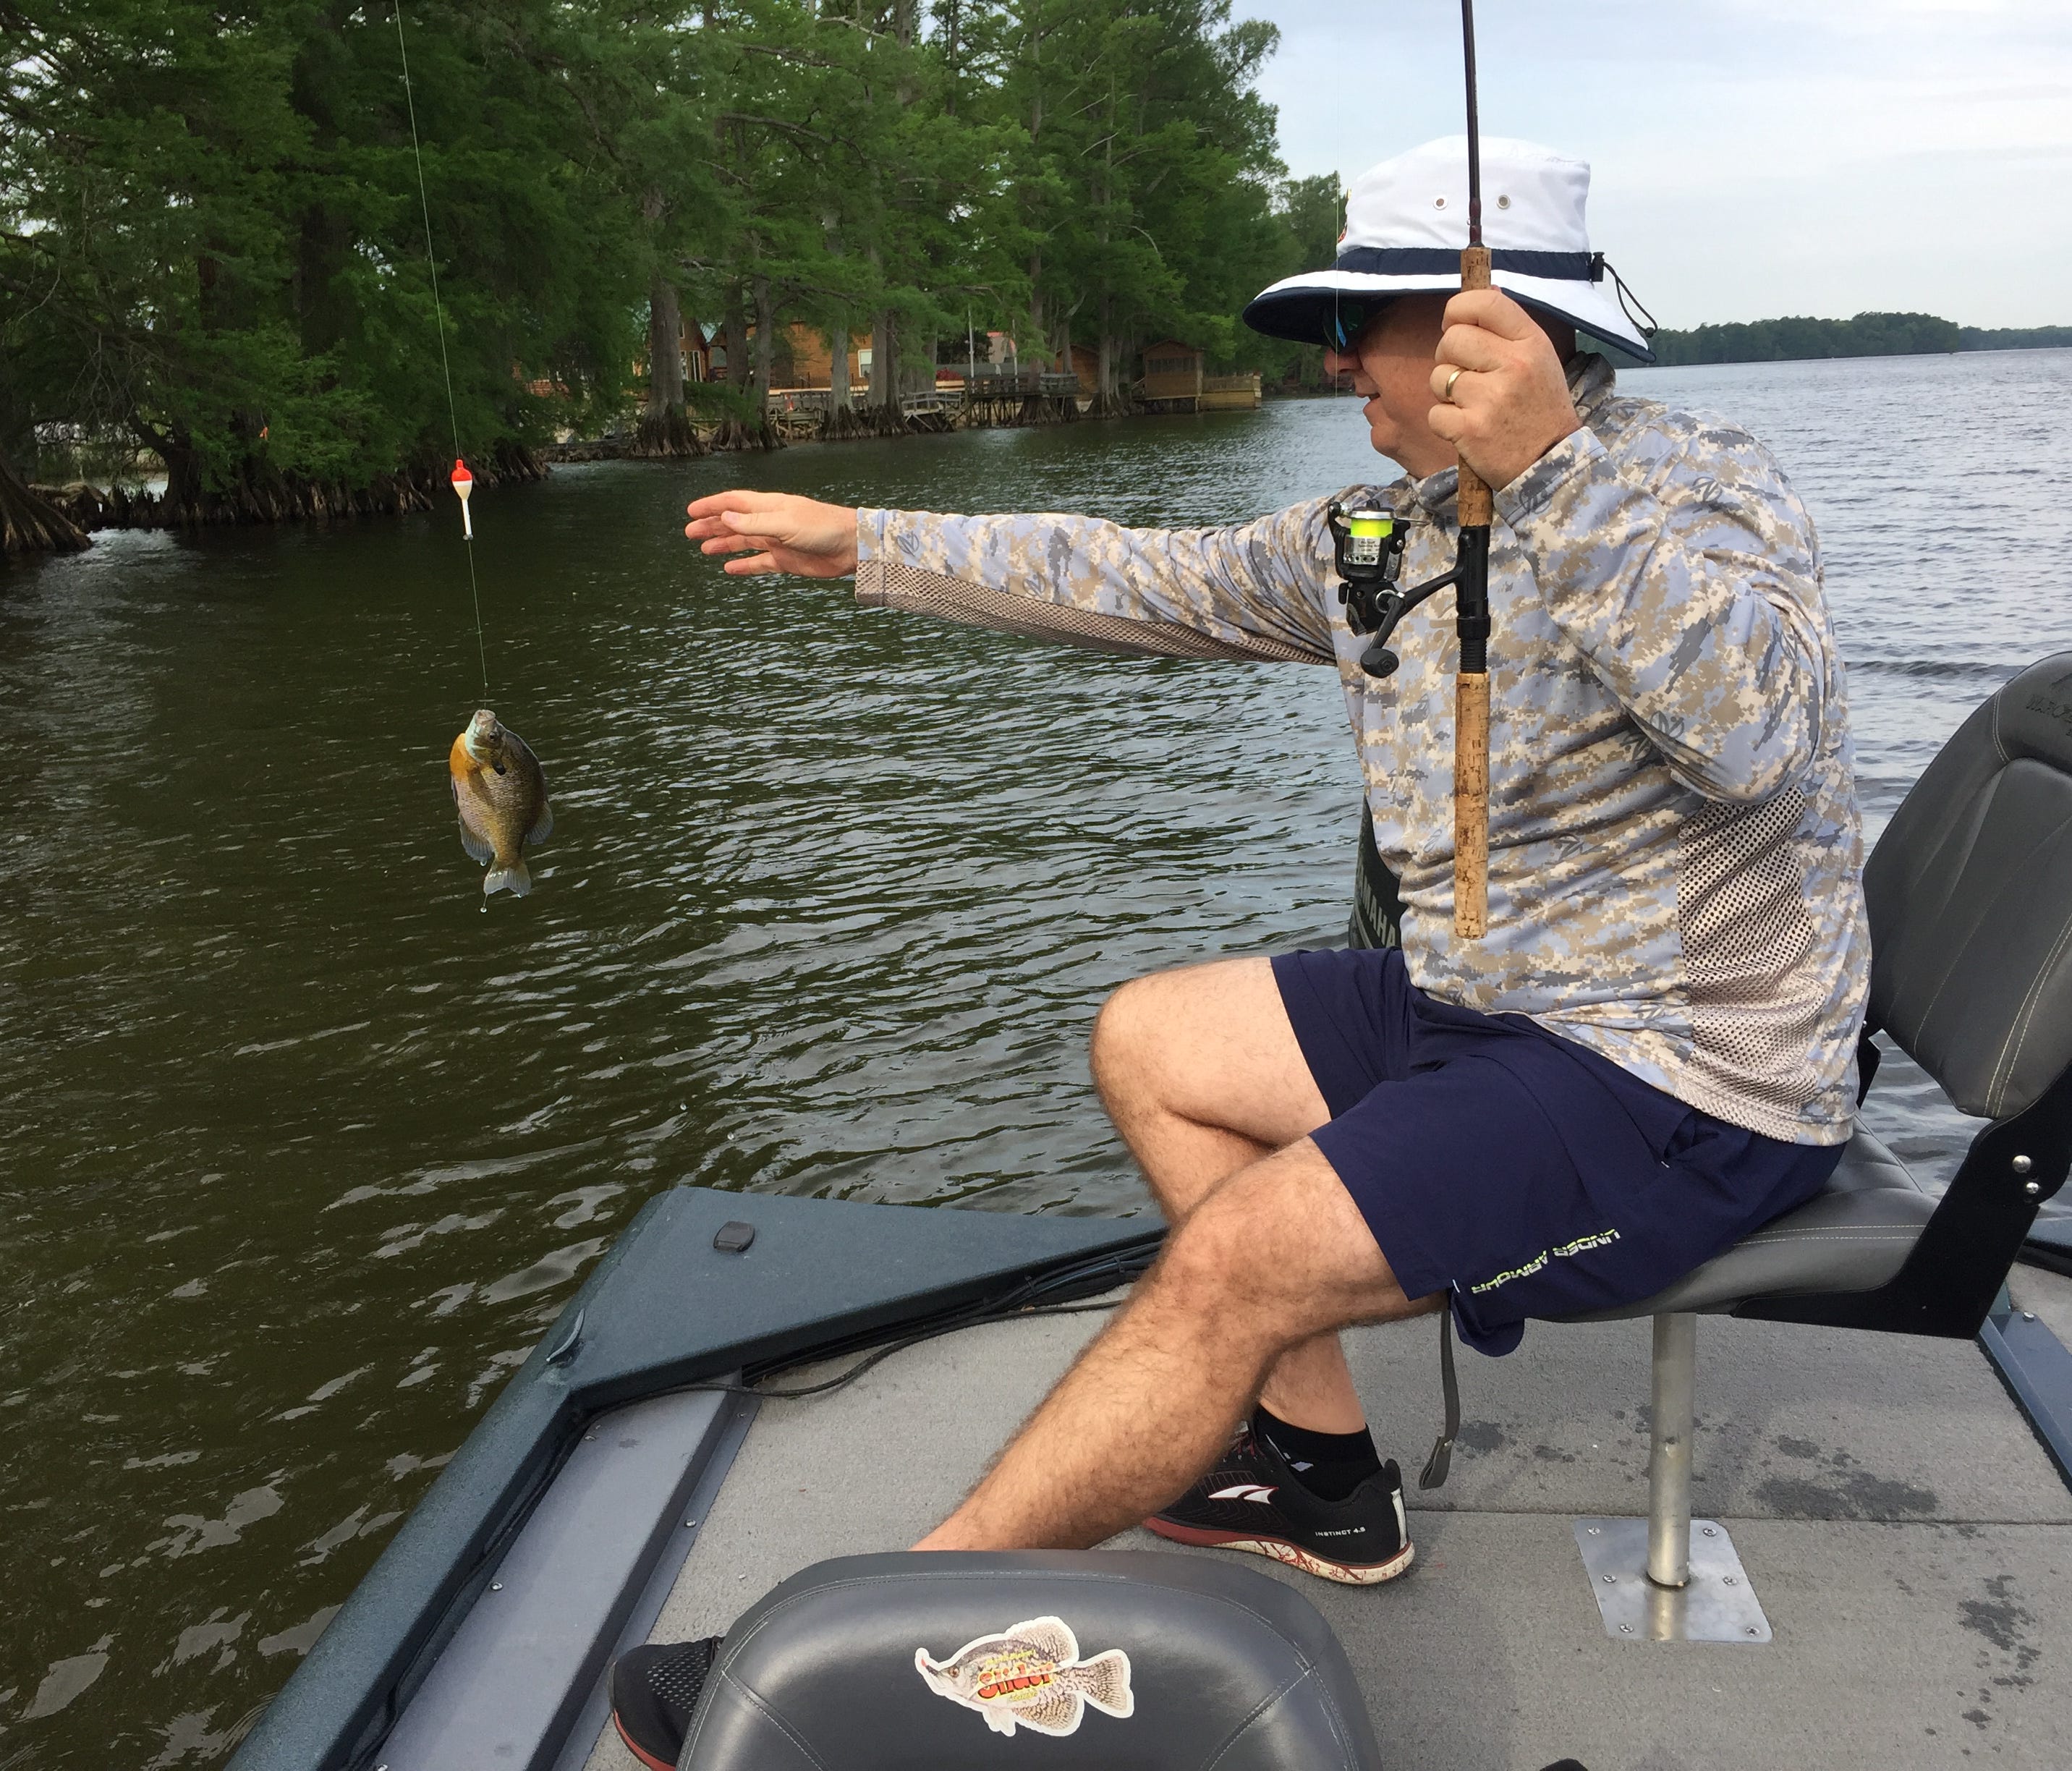 Alan Clemons brings a bluegill to hand. He learned to located spawning beds by smell when fishing as a child with his mother and father, Ann and Charles Clemons. 